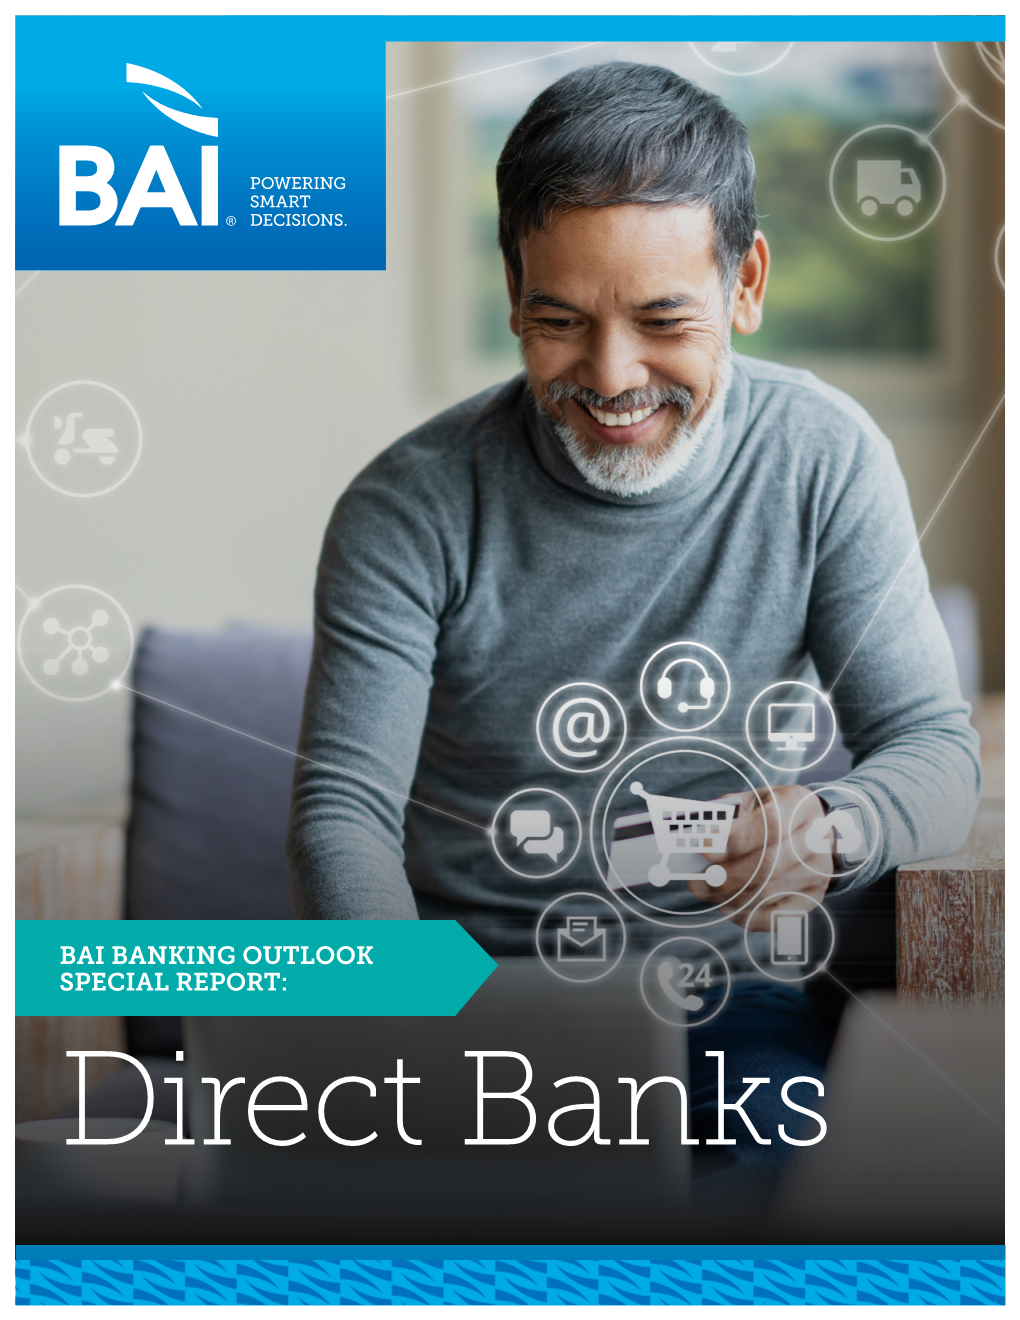 BAI BANKING OUTLOOK SPECIAL REPORT: Direct Banks Direct Banks Seek to Gain the Edge on Their Traditional Rivals